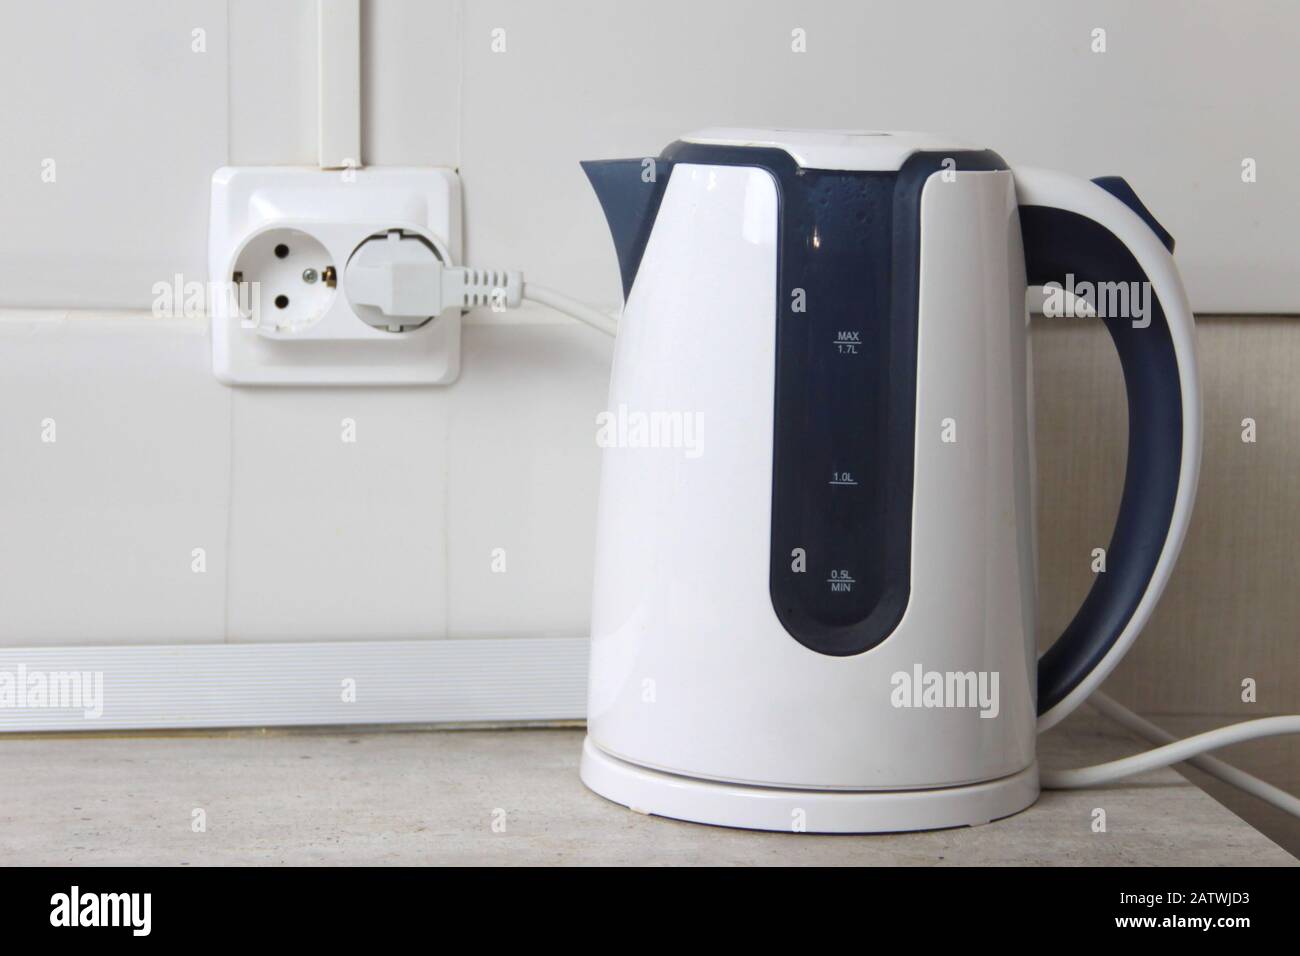 https://c8.alamy.com/comp/2ATWJD3/white-electric-kettle-stands-on-a-gray-table-plugged-into-a-power-outlet-2ATWJD3.jpg